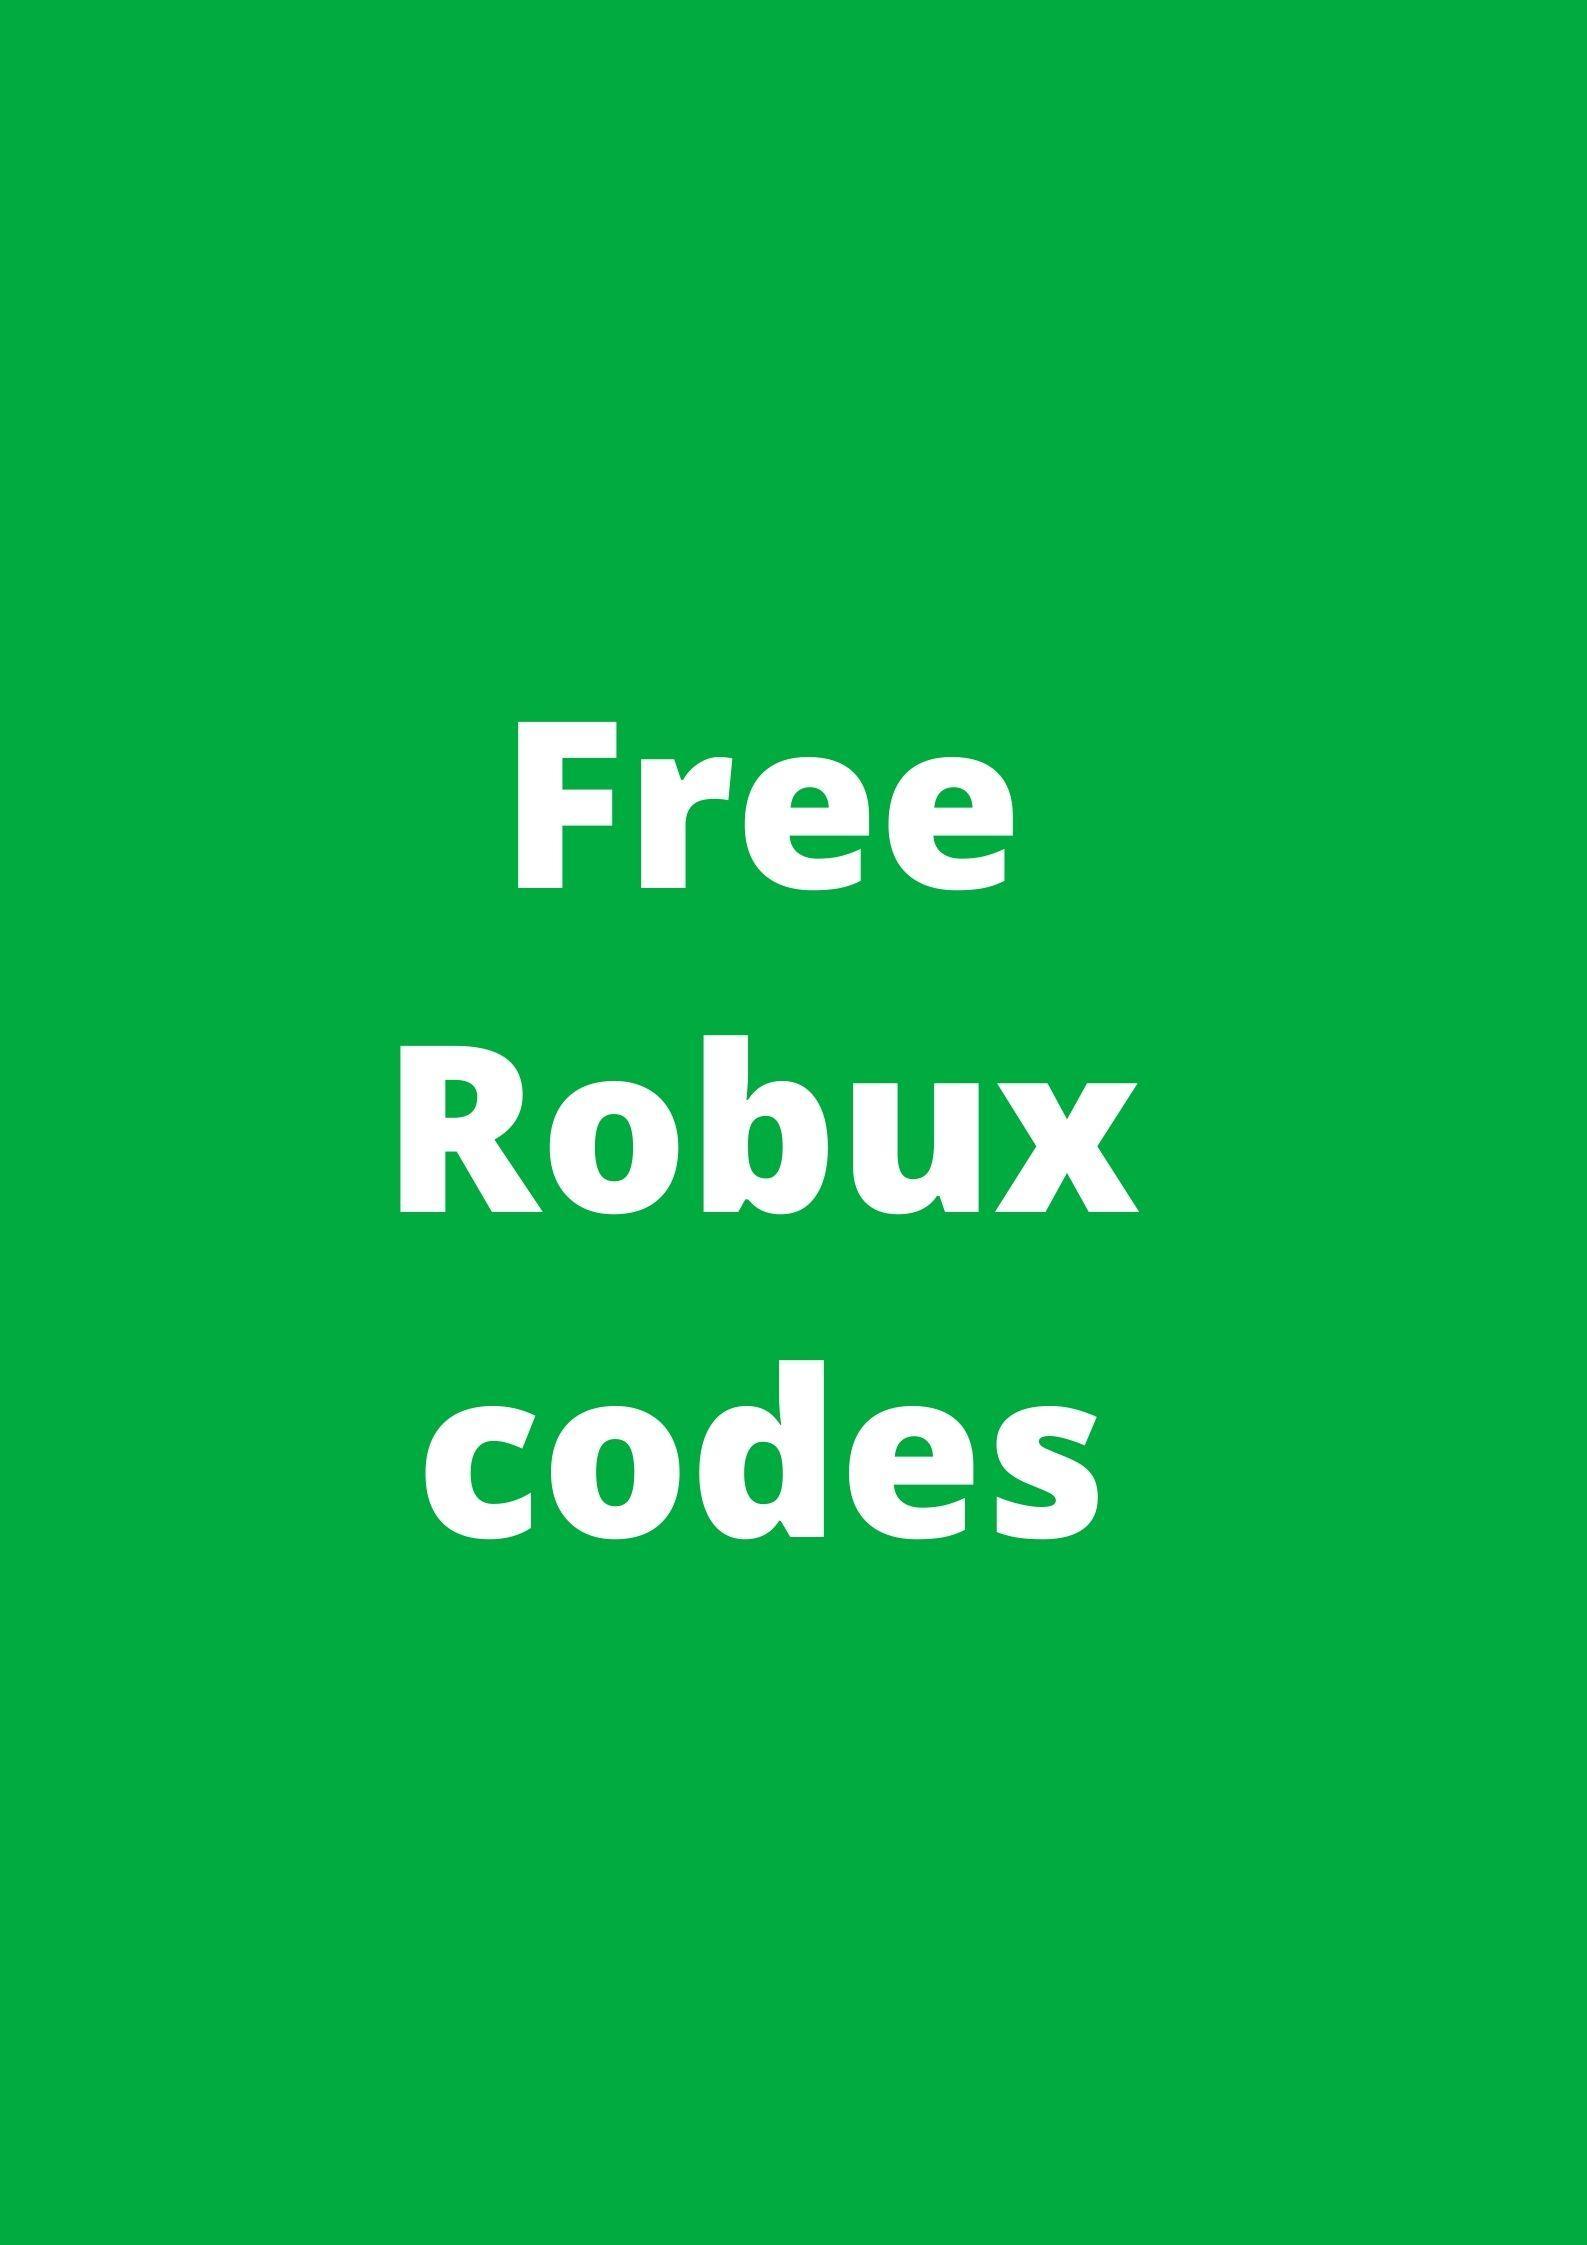 Free Robux Codes Guides 2020 For Android Apk Download - what are some robux codes 2020